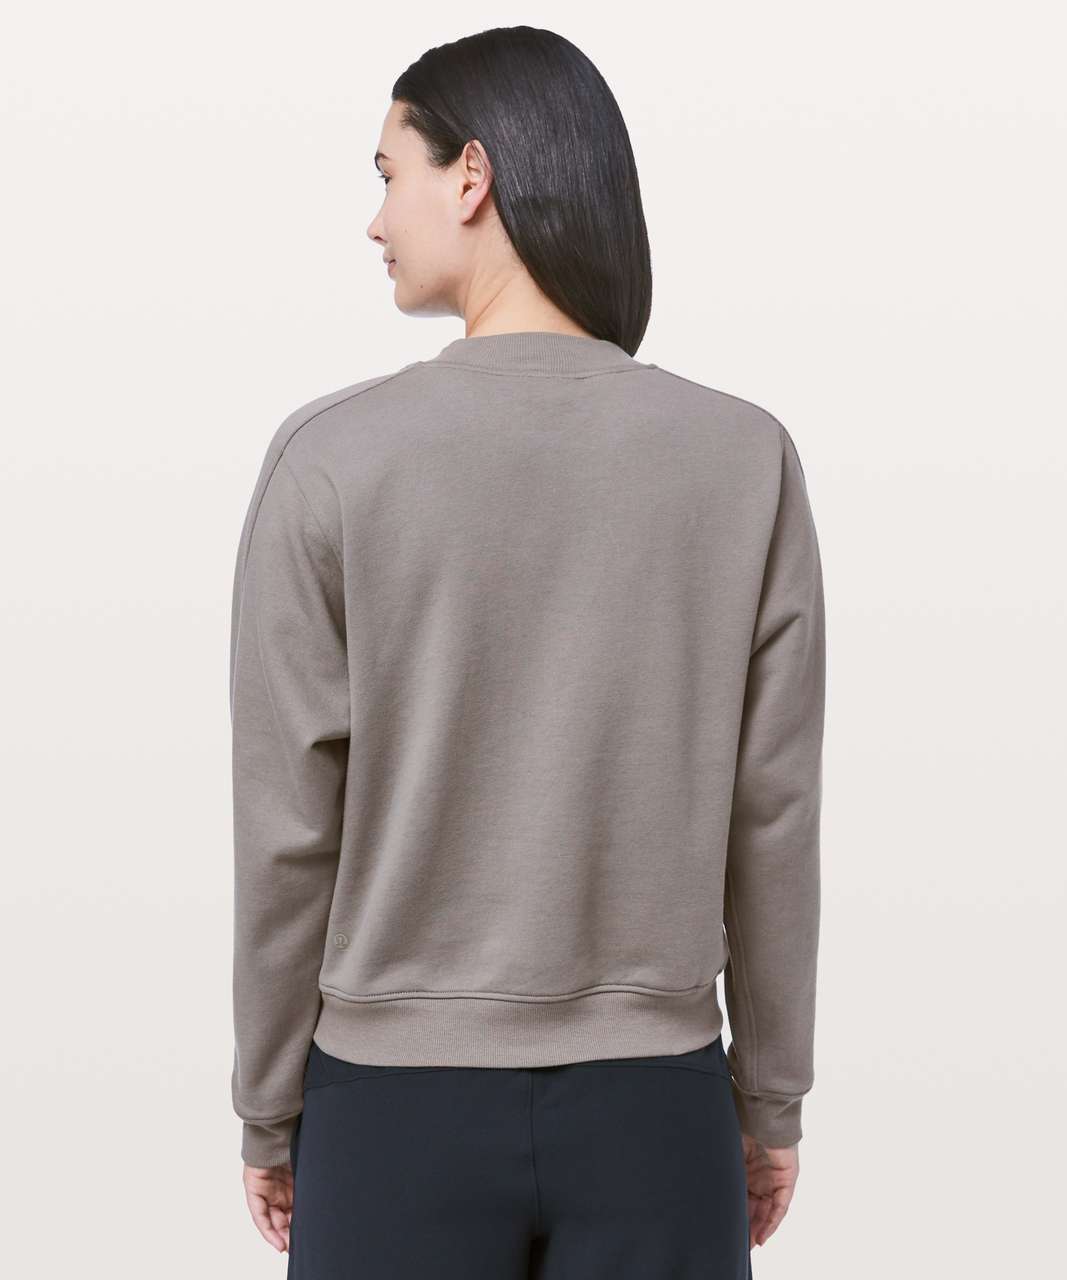 Lululemon Chill On Pullover - Carbon Dust